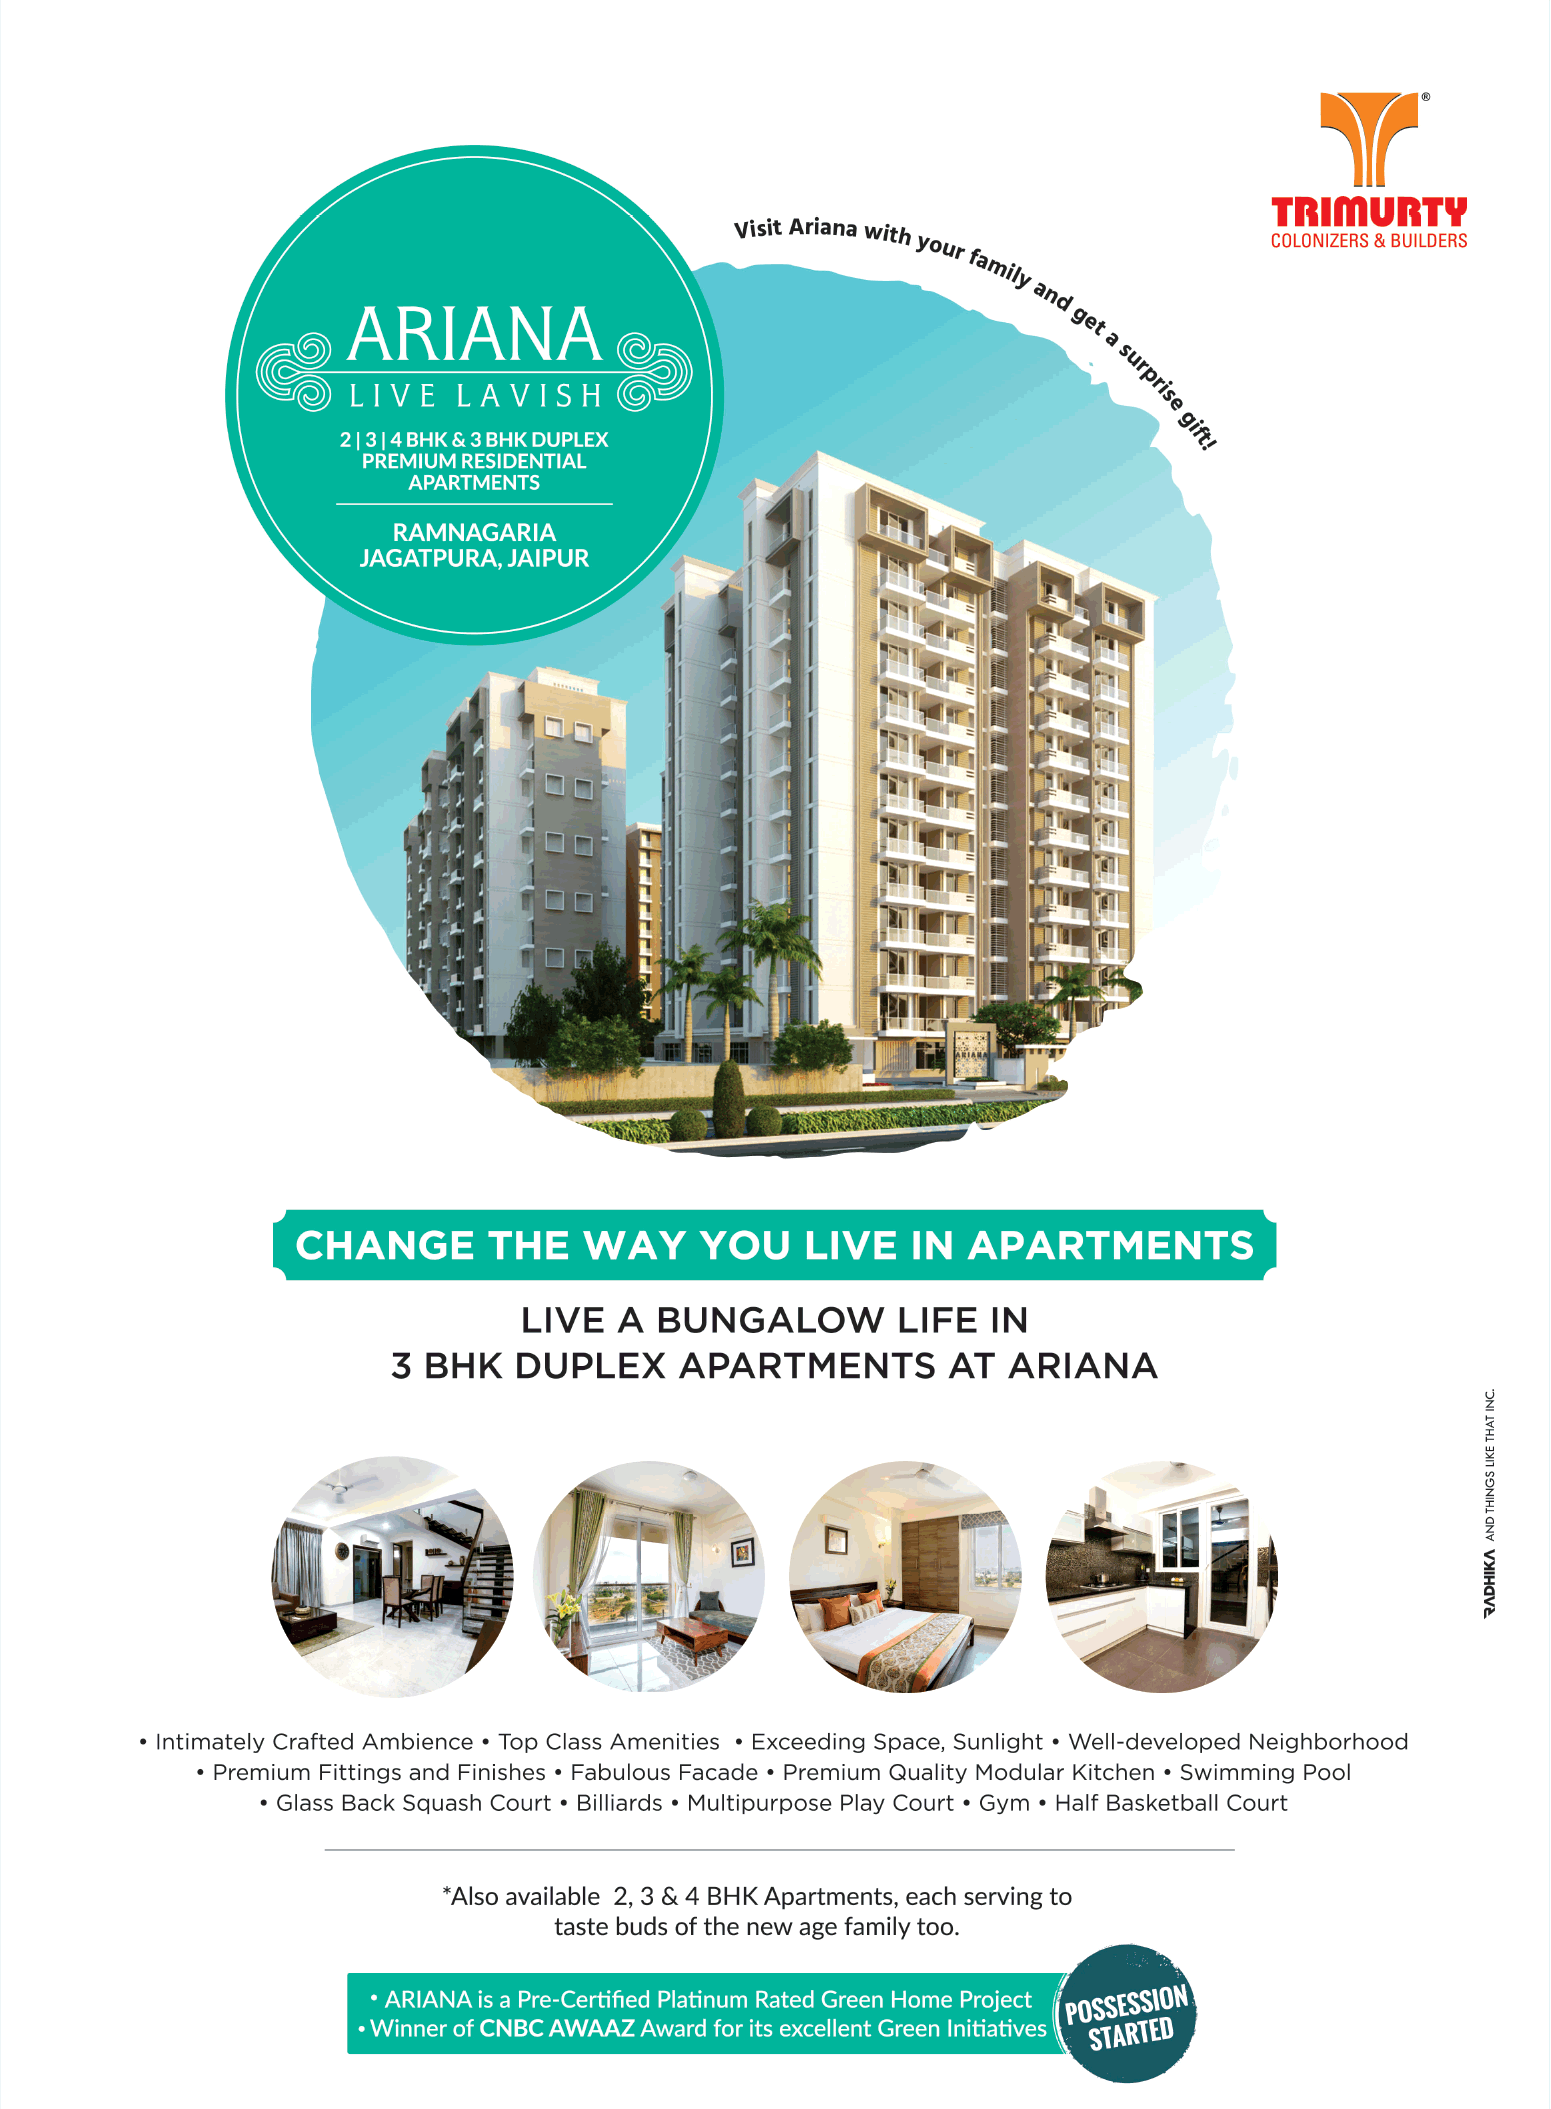 Live a bungalow life in 3 bhk duplex apartments at Trimurty Ariana in Jaipur